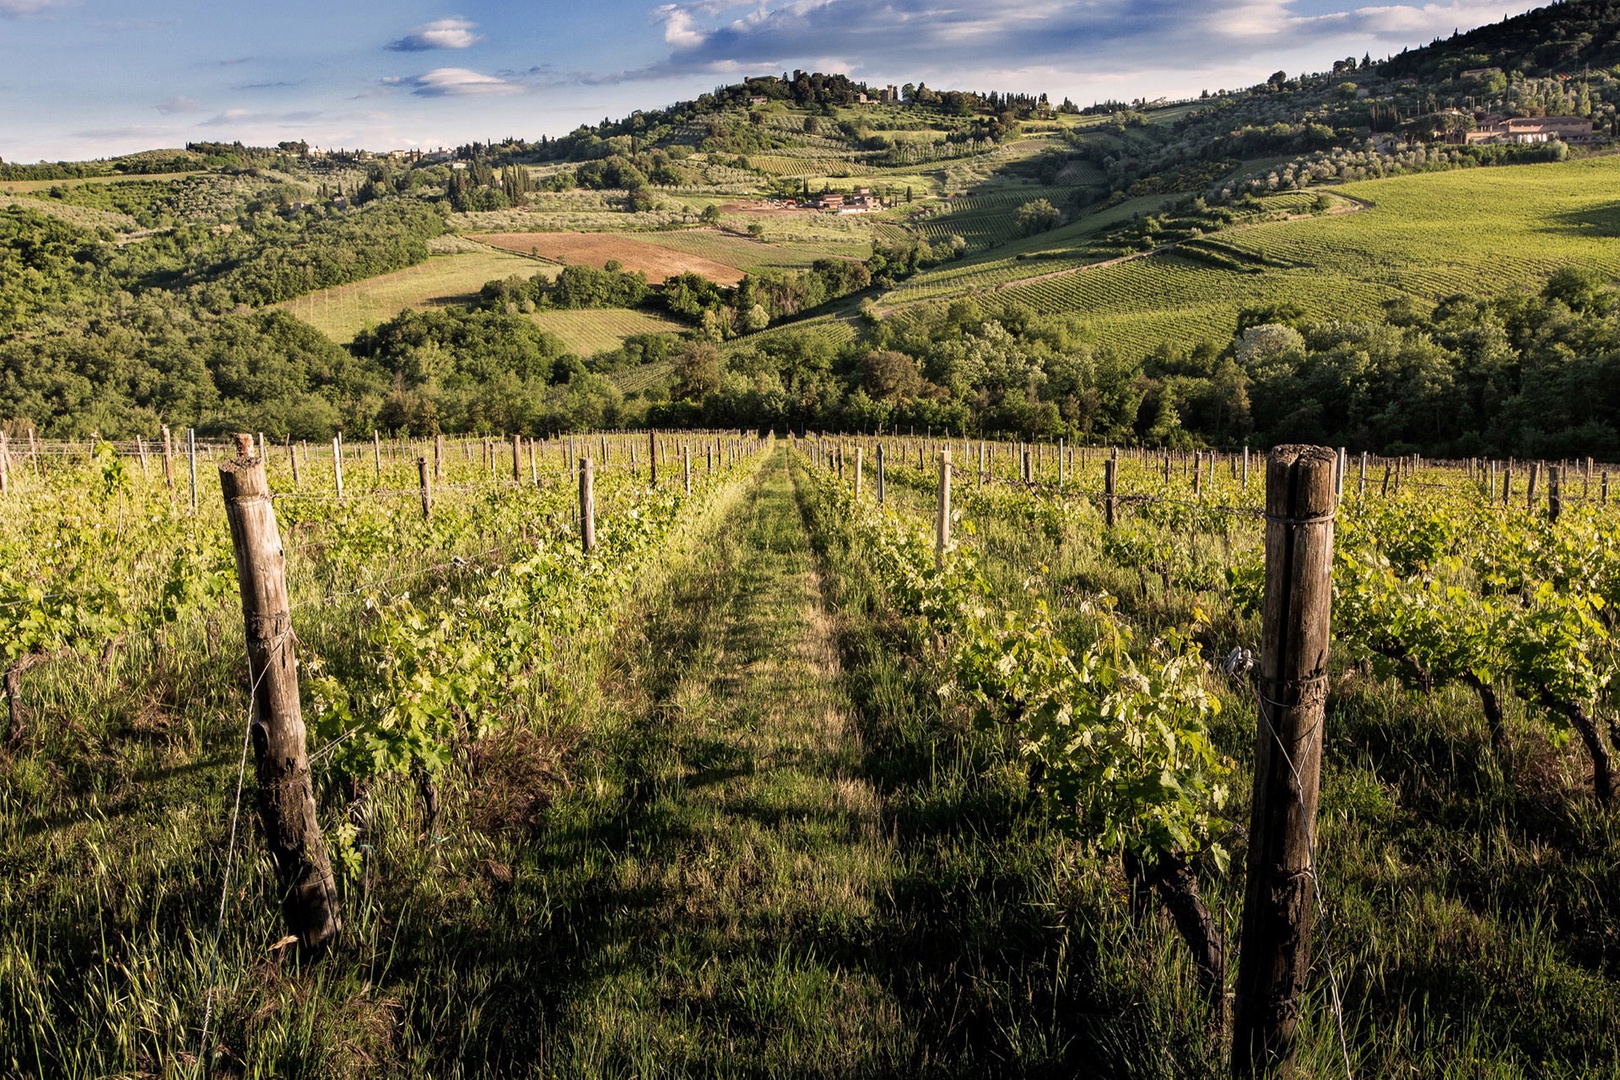 Be enchanted by the scenic views of vineyards and rolling hills that stretch out into the distance.